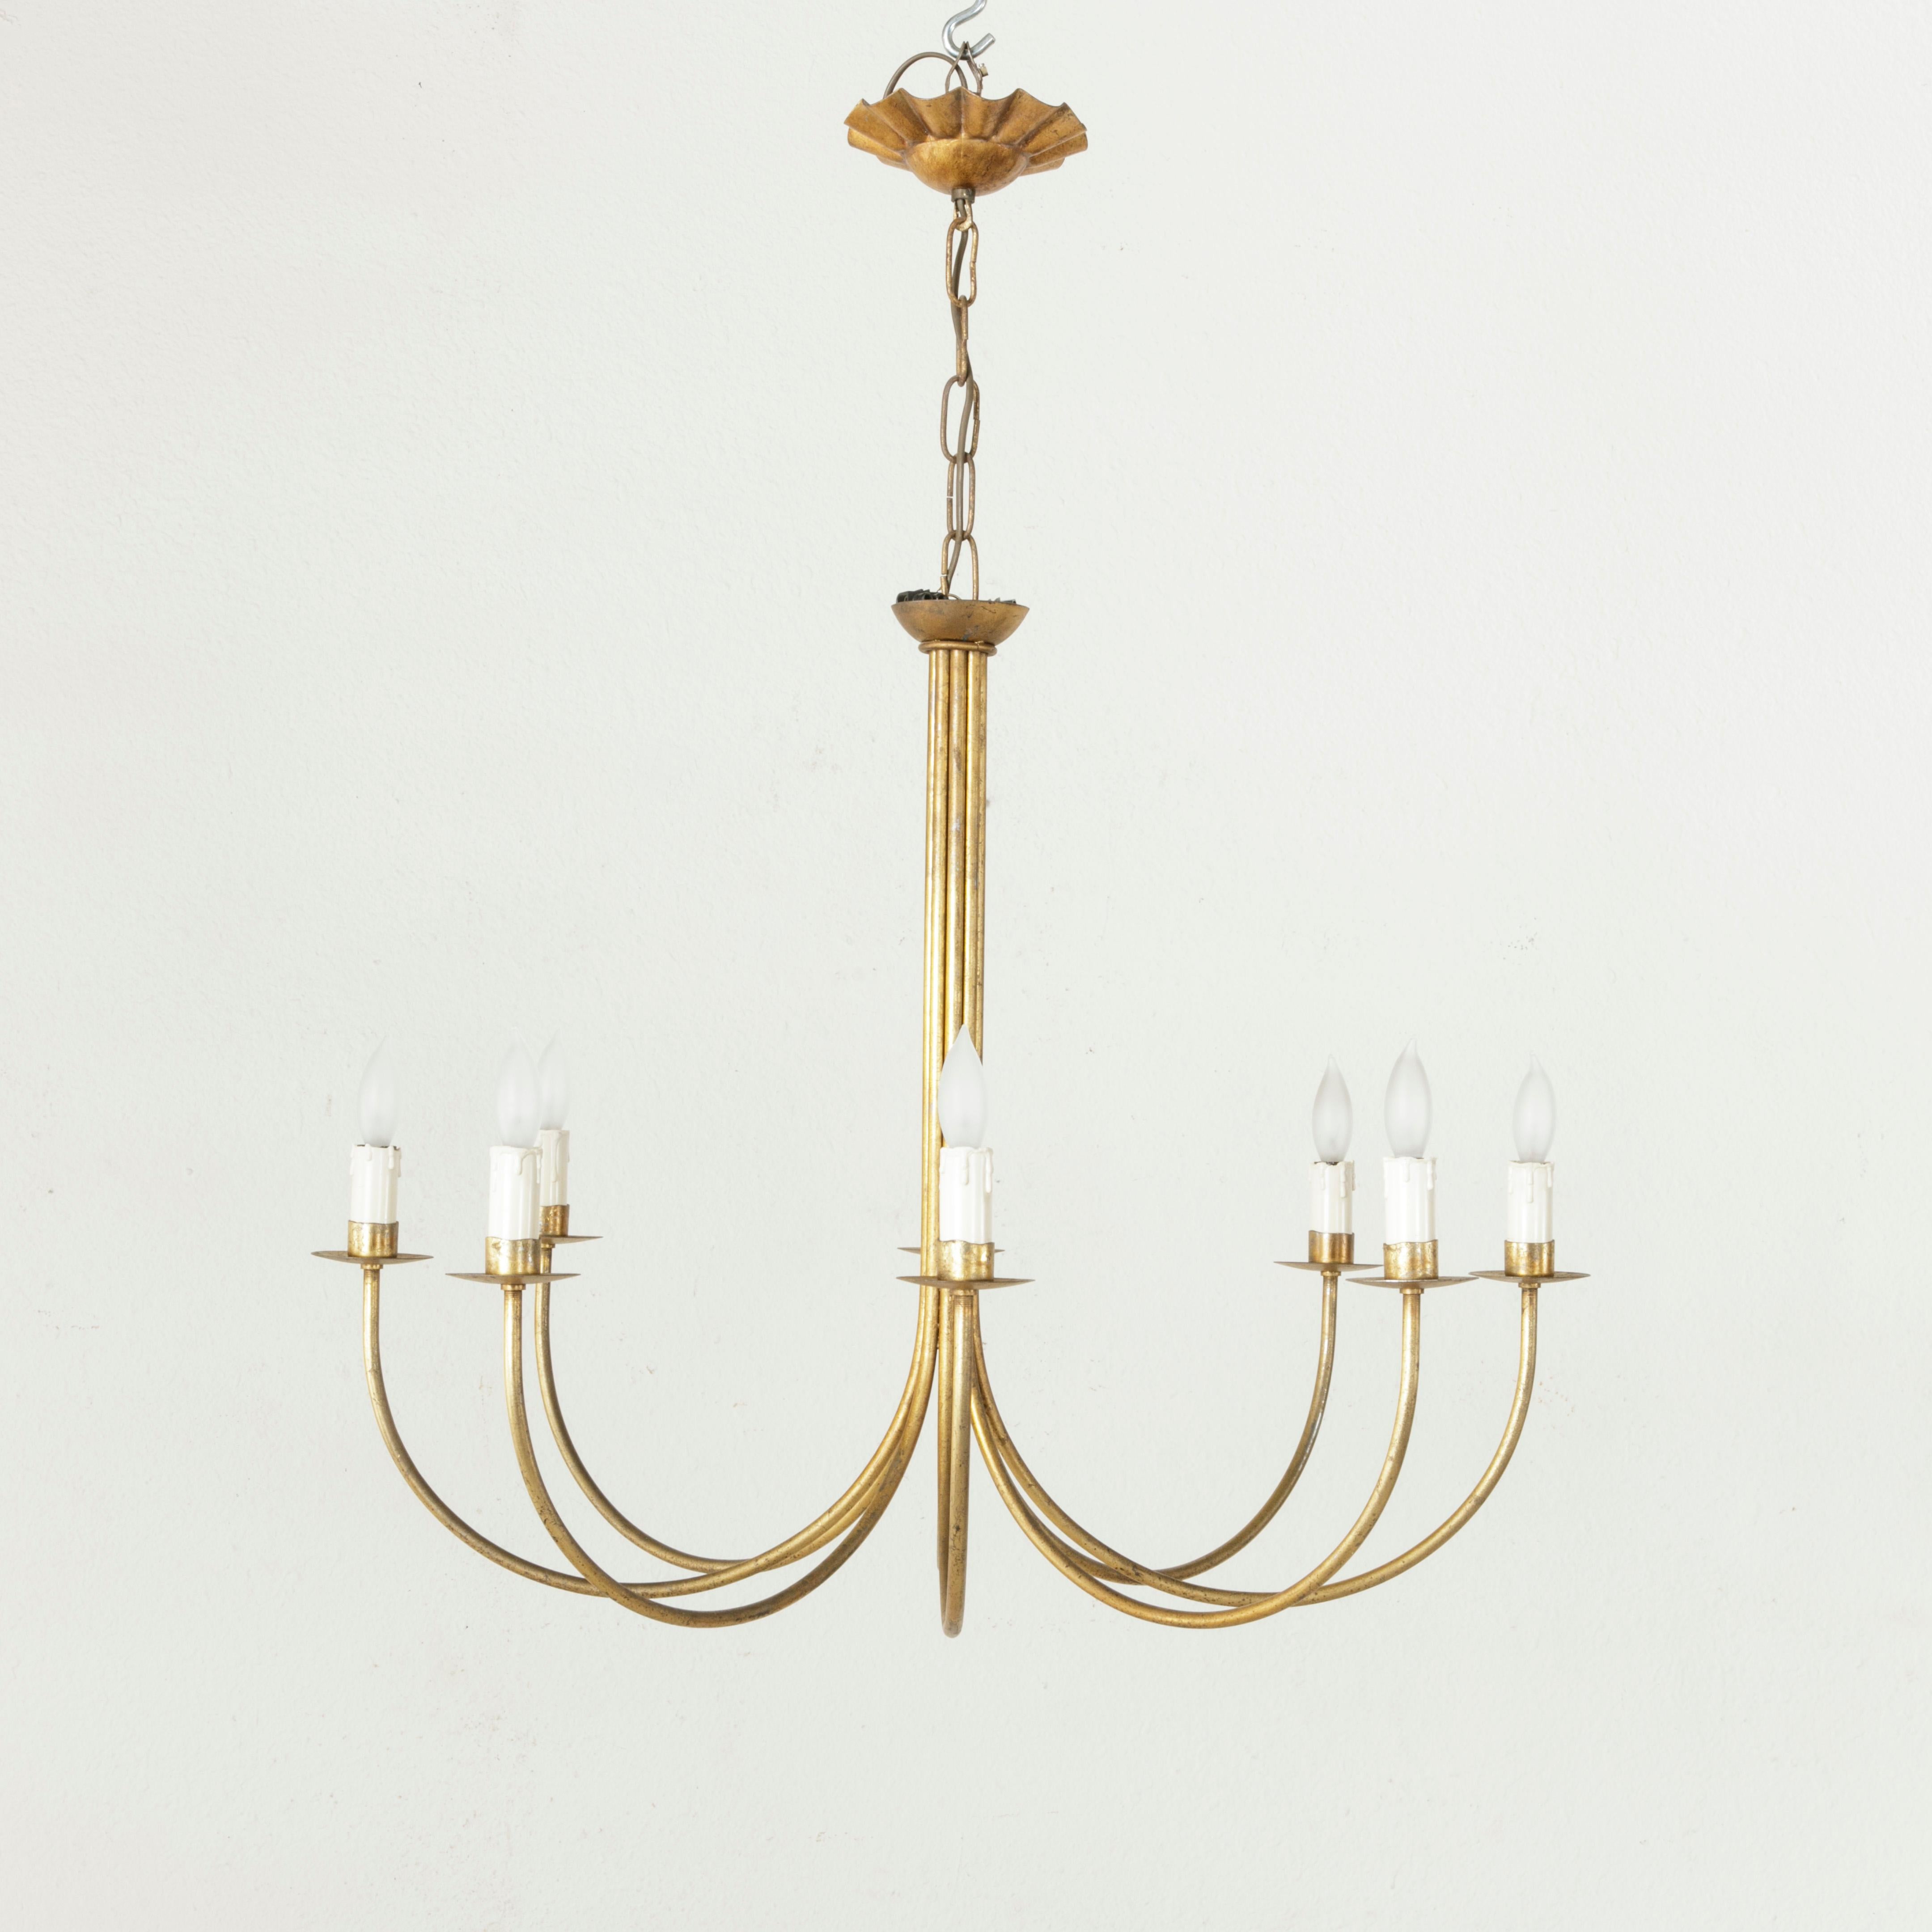 Large Mid-20th Century French Gilt Metal Chandelier with Eight Lights 1